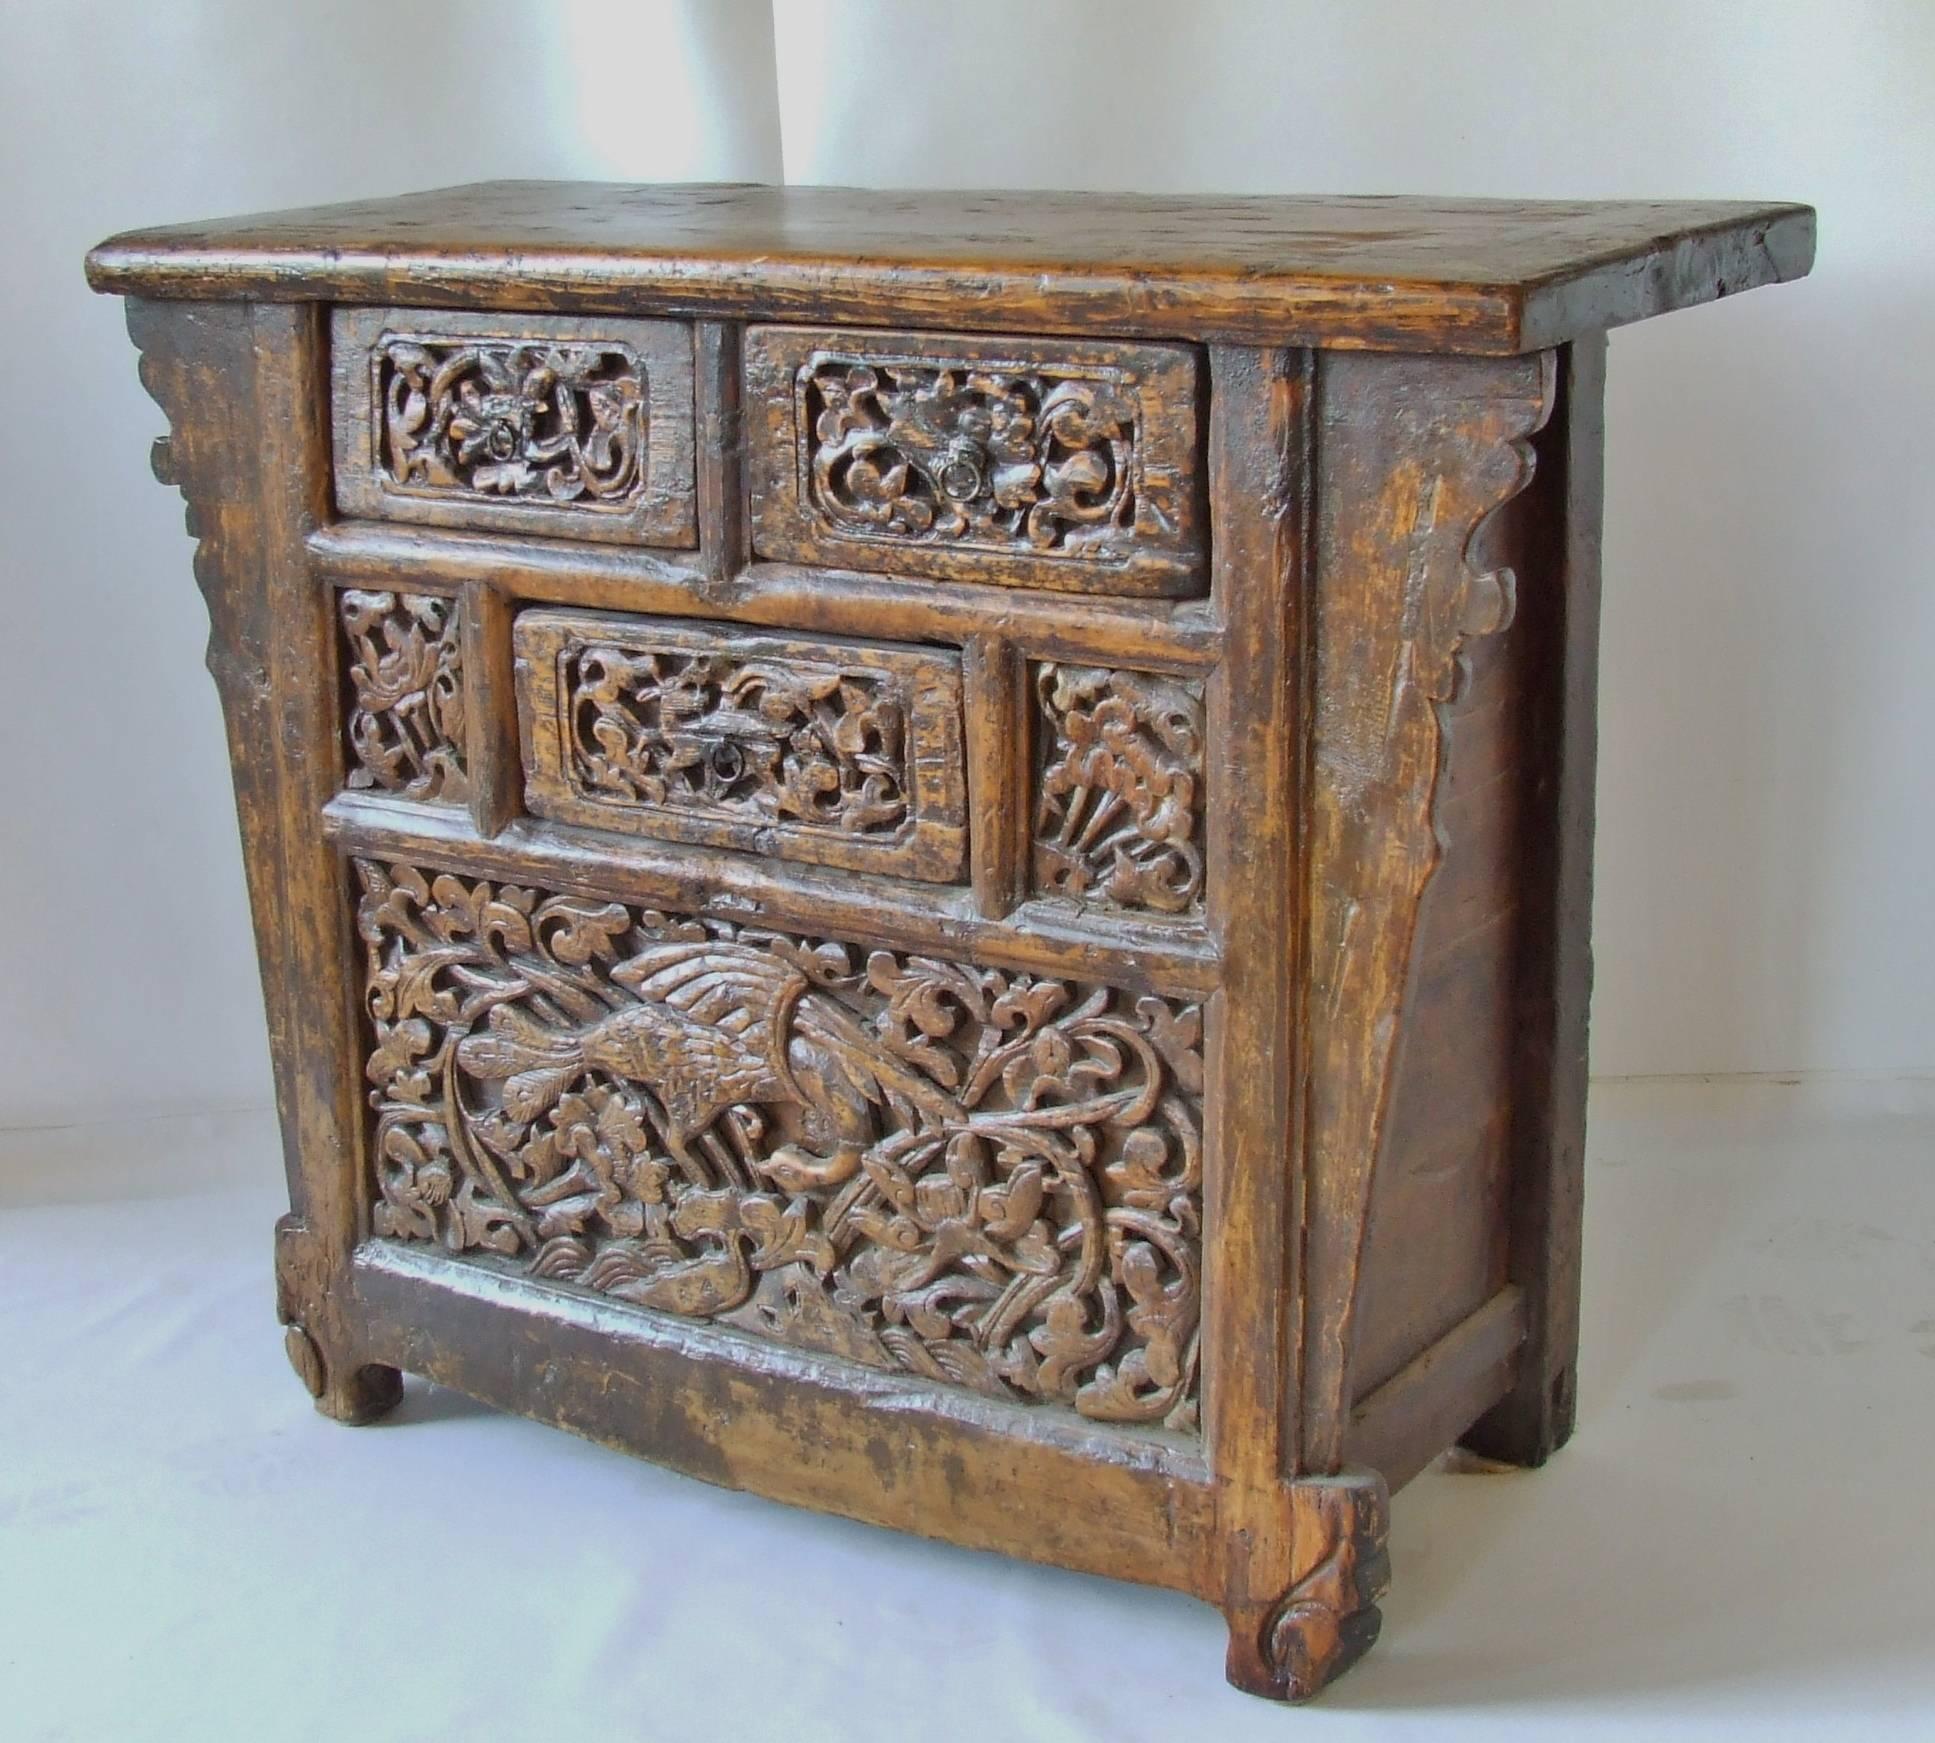 Outstanding hand-carved elmwood antique Chinese coffer. Cabinet has original lacquer finish with very deep carving. There are three drawers with an open space under the bottom drawer to hide your silver. The is a one of a kind piece of Chinese art